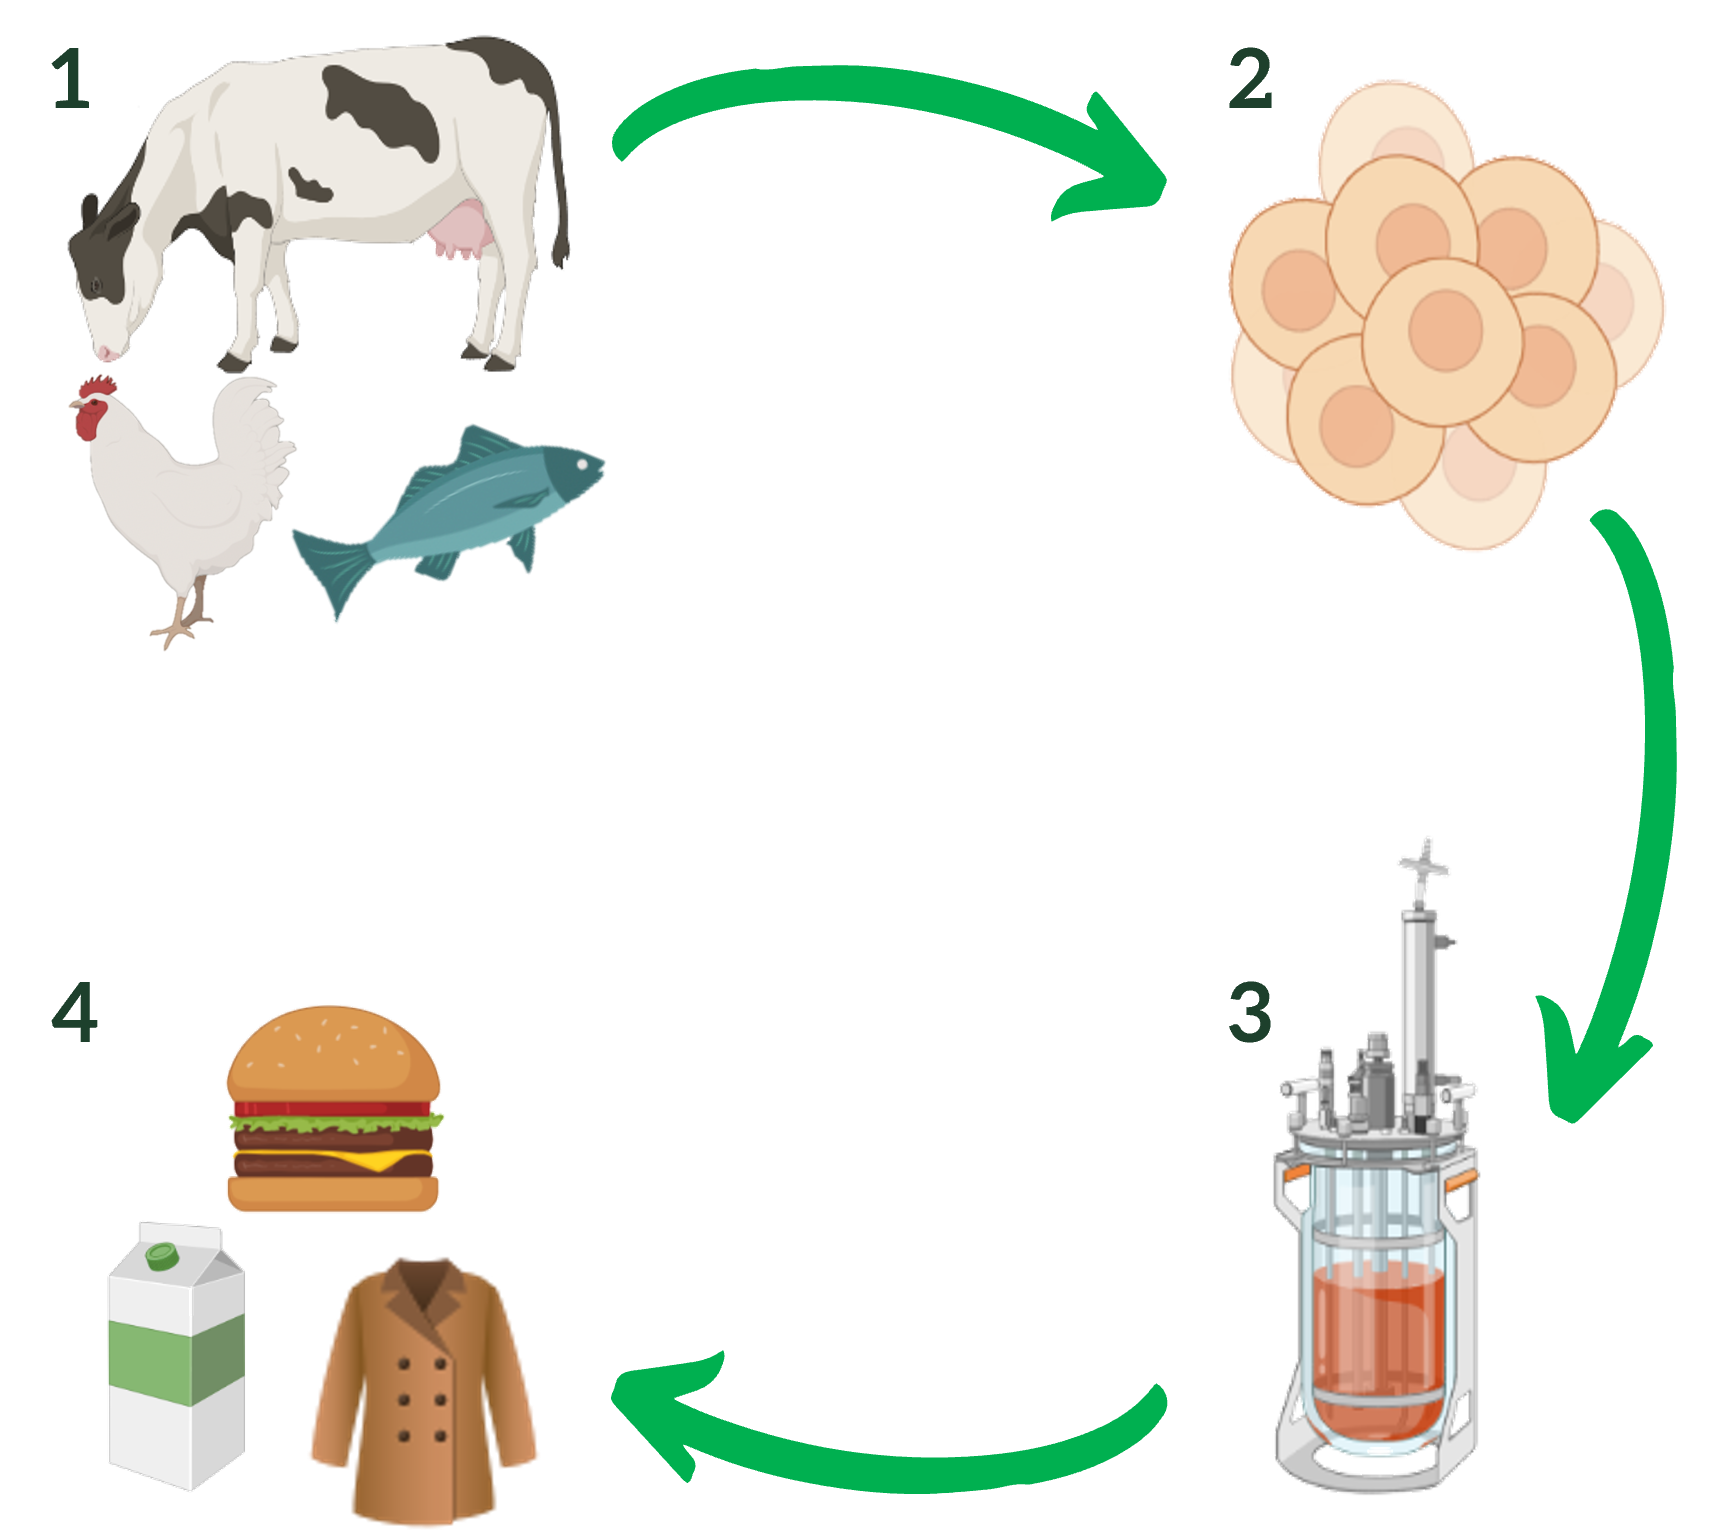 Process of production of a cellular agriculture product